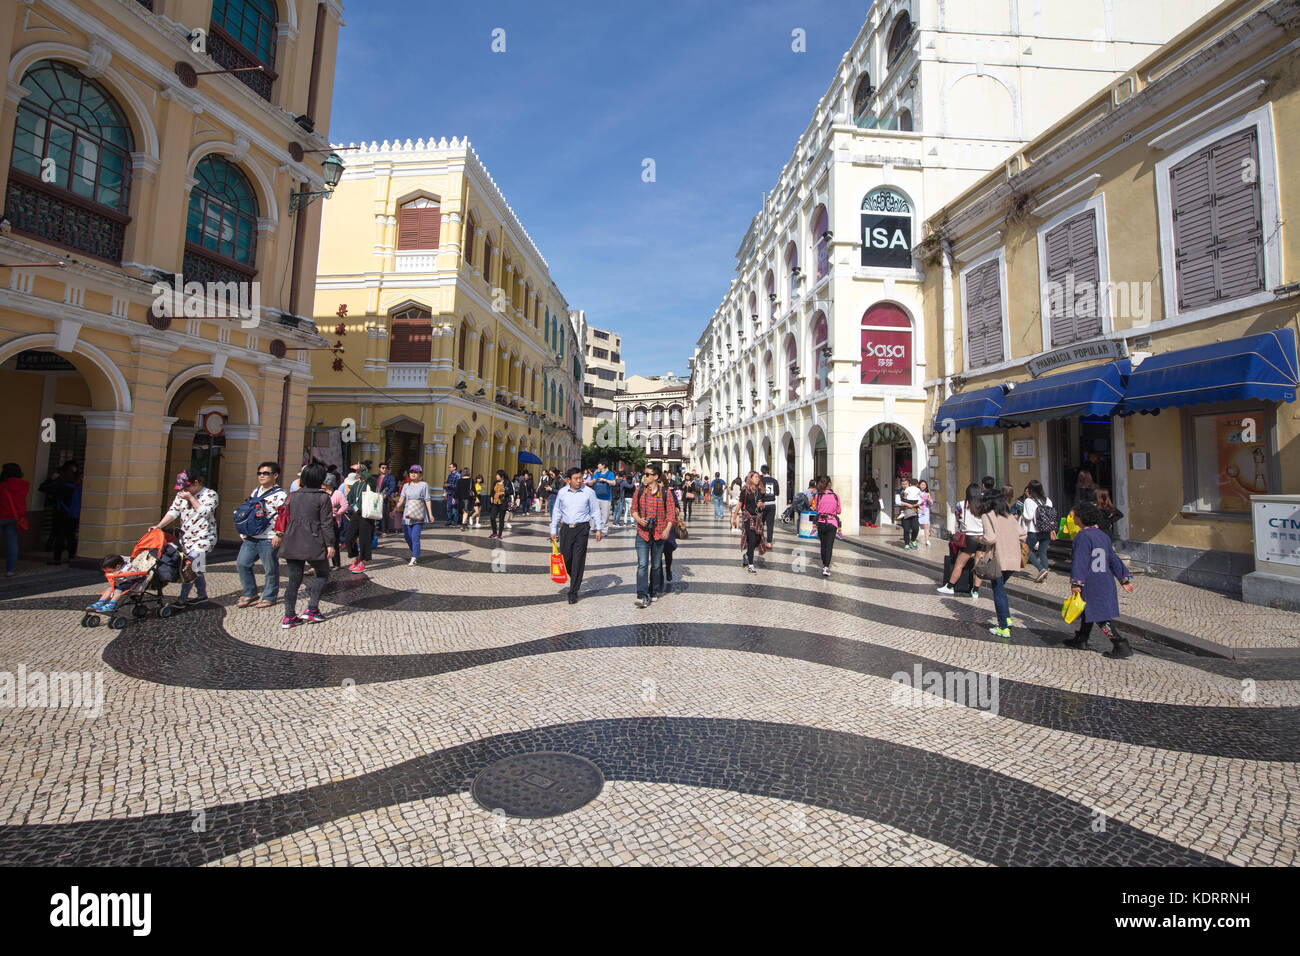 Macao,china - feb,17,2017:The Senado Square, or Senate Square is a paved town square in Macau, China and part of the UNESCO Historic Centre of Macau W Stock Photo